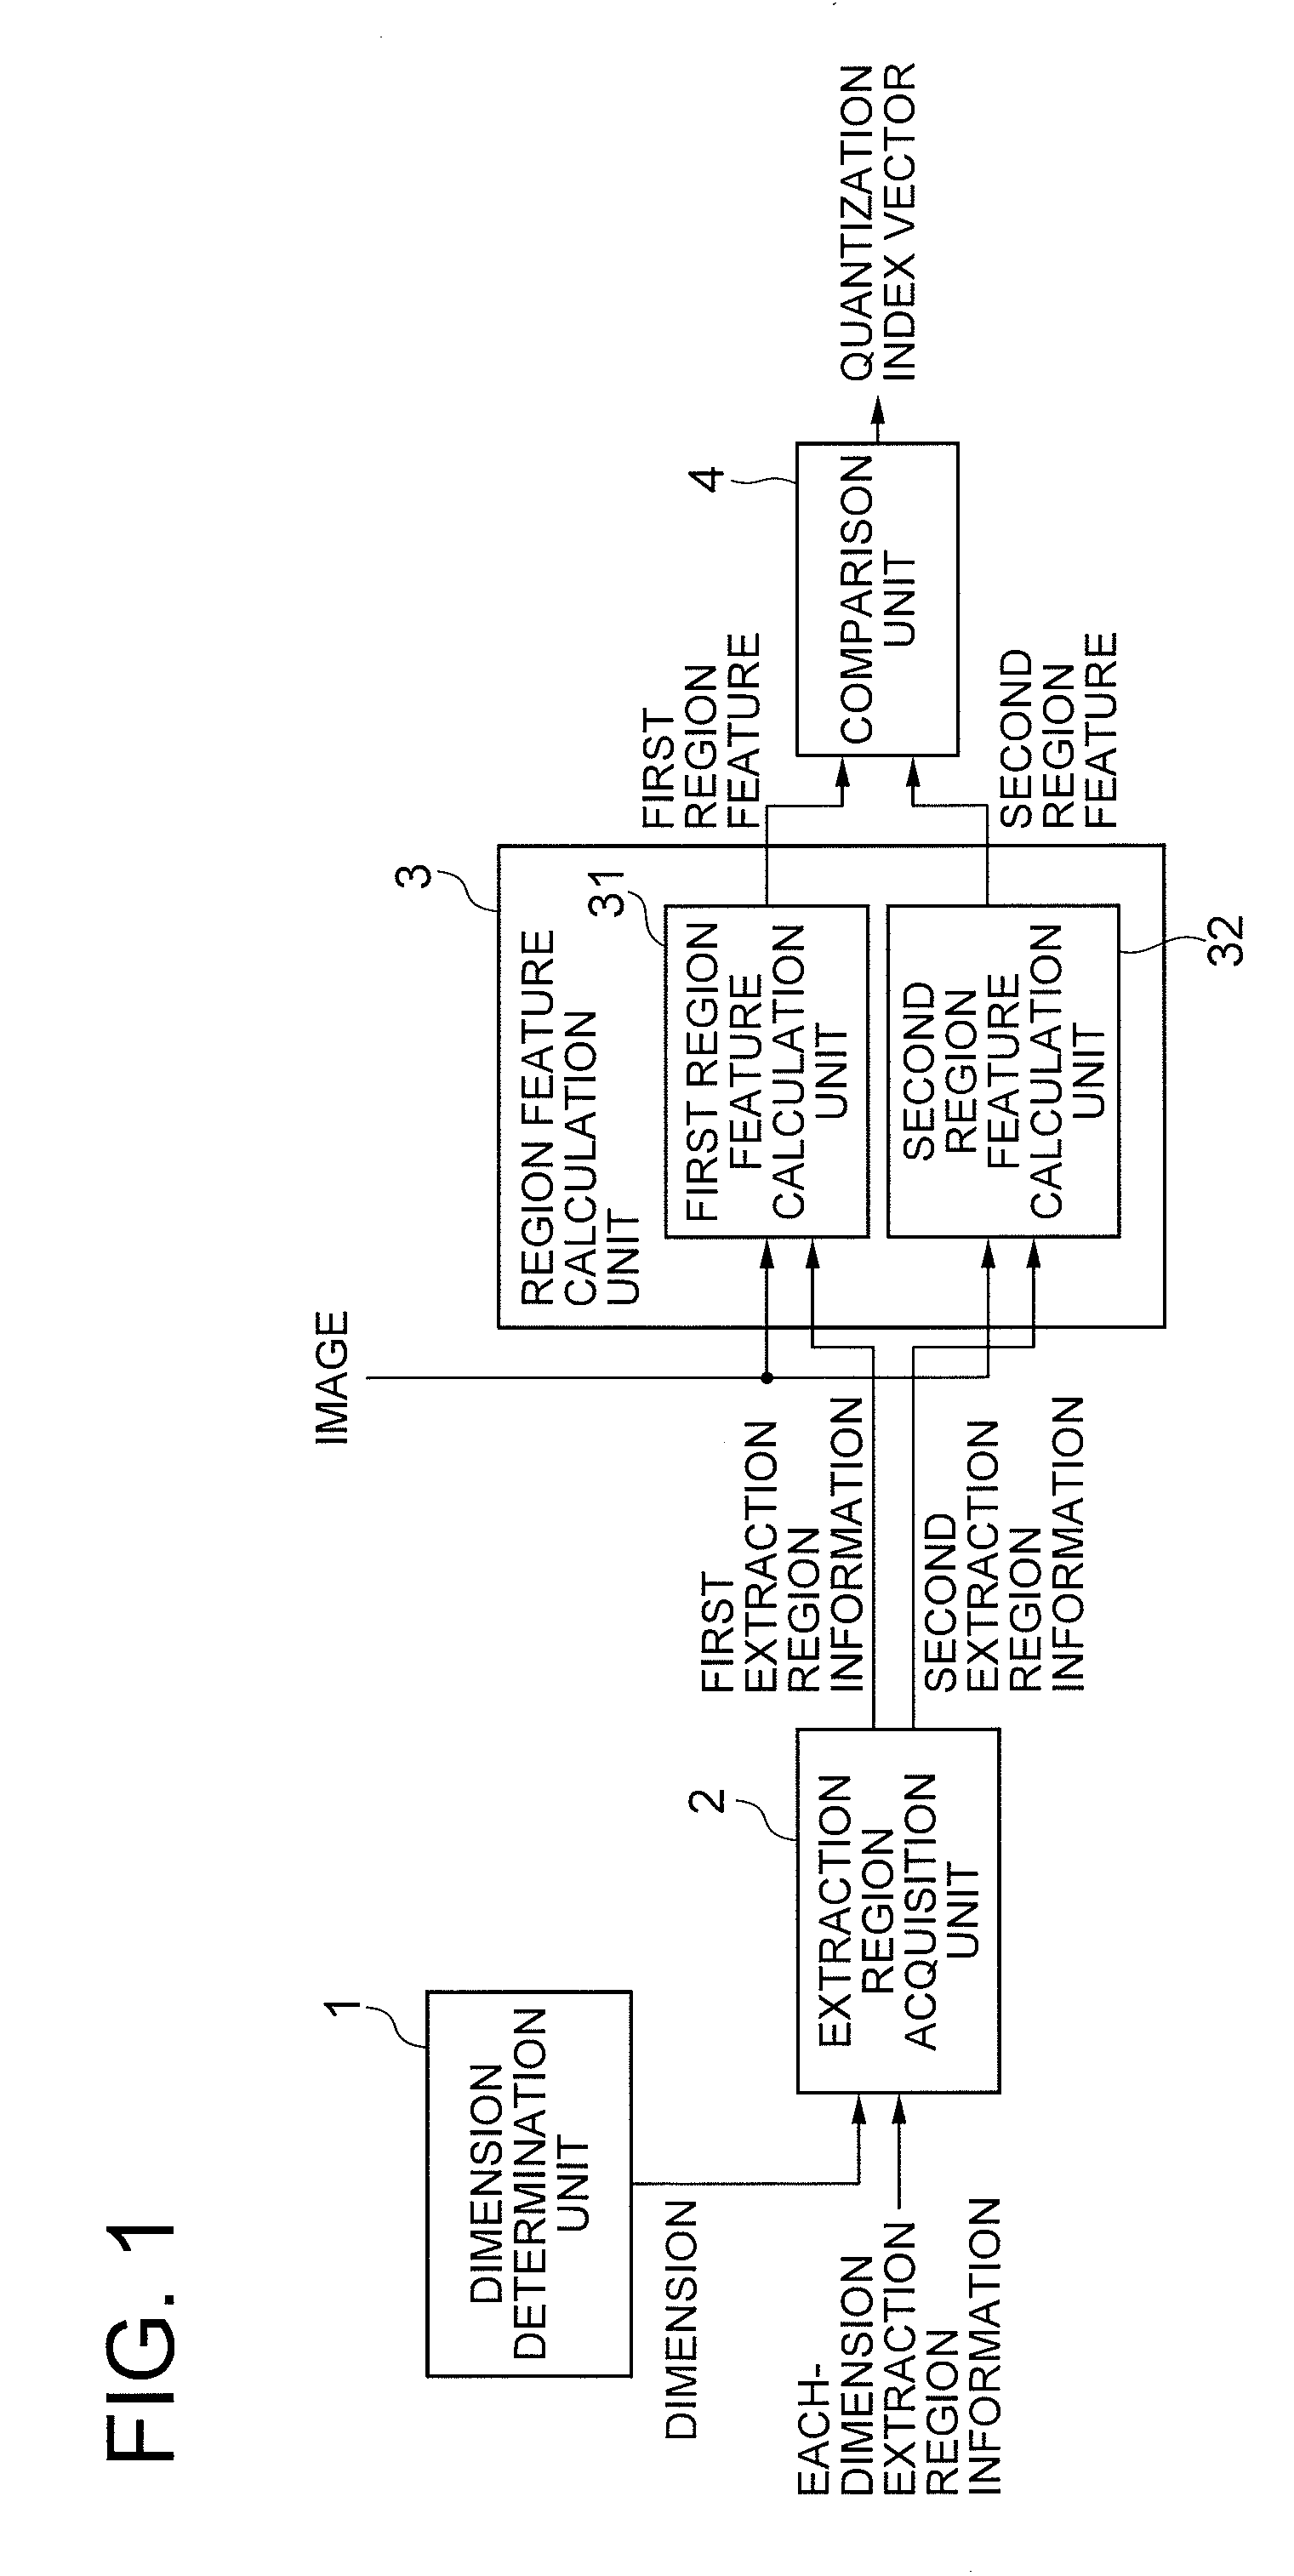 Image signature extraction device